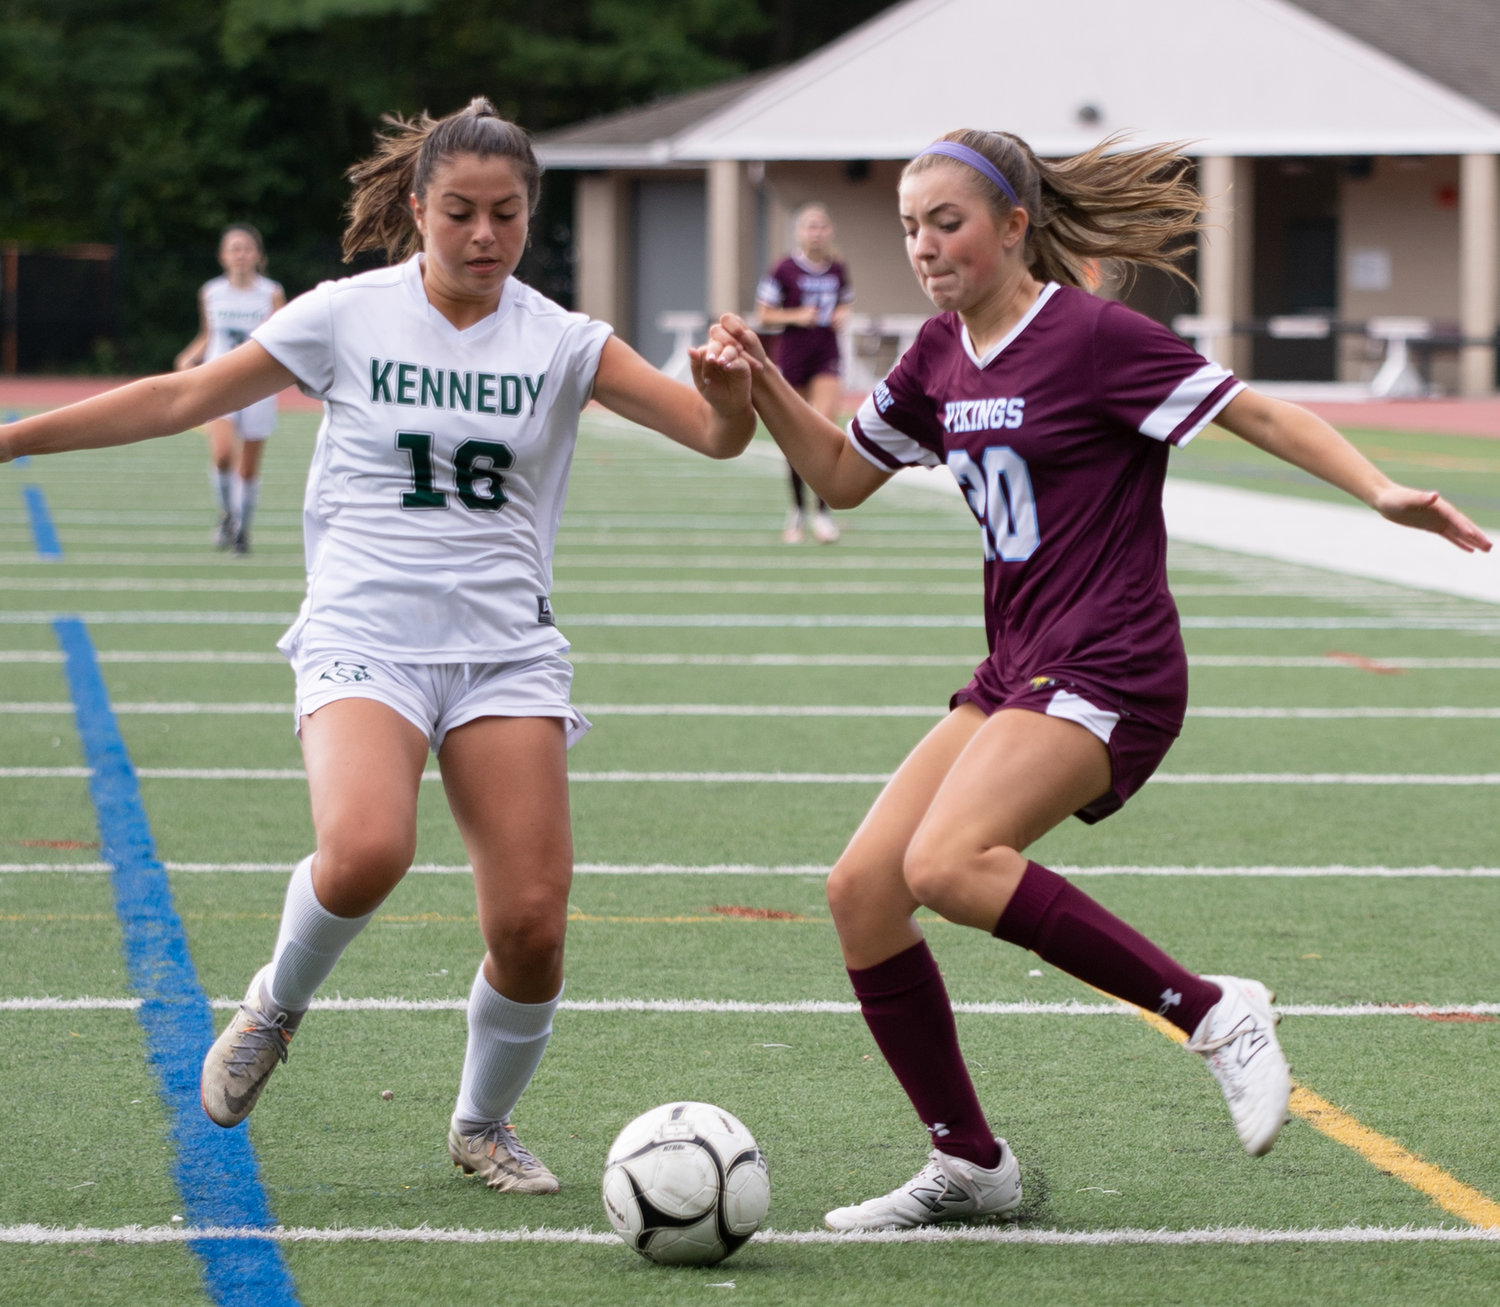 North Shore’s Vanessa Jahnke, right, battled with Kennedy’s Gabriella Mazzaferro during last Saturday’s 2-0 Vikings’ victory.